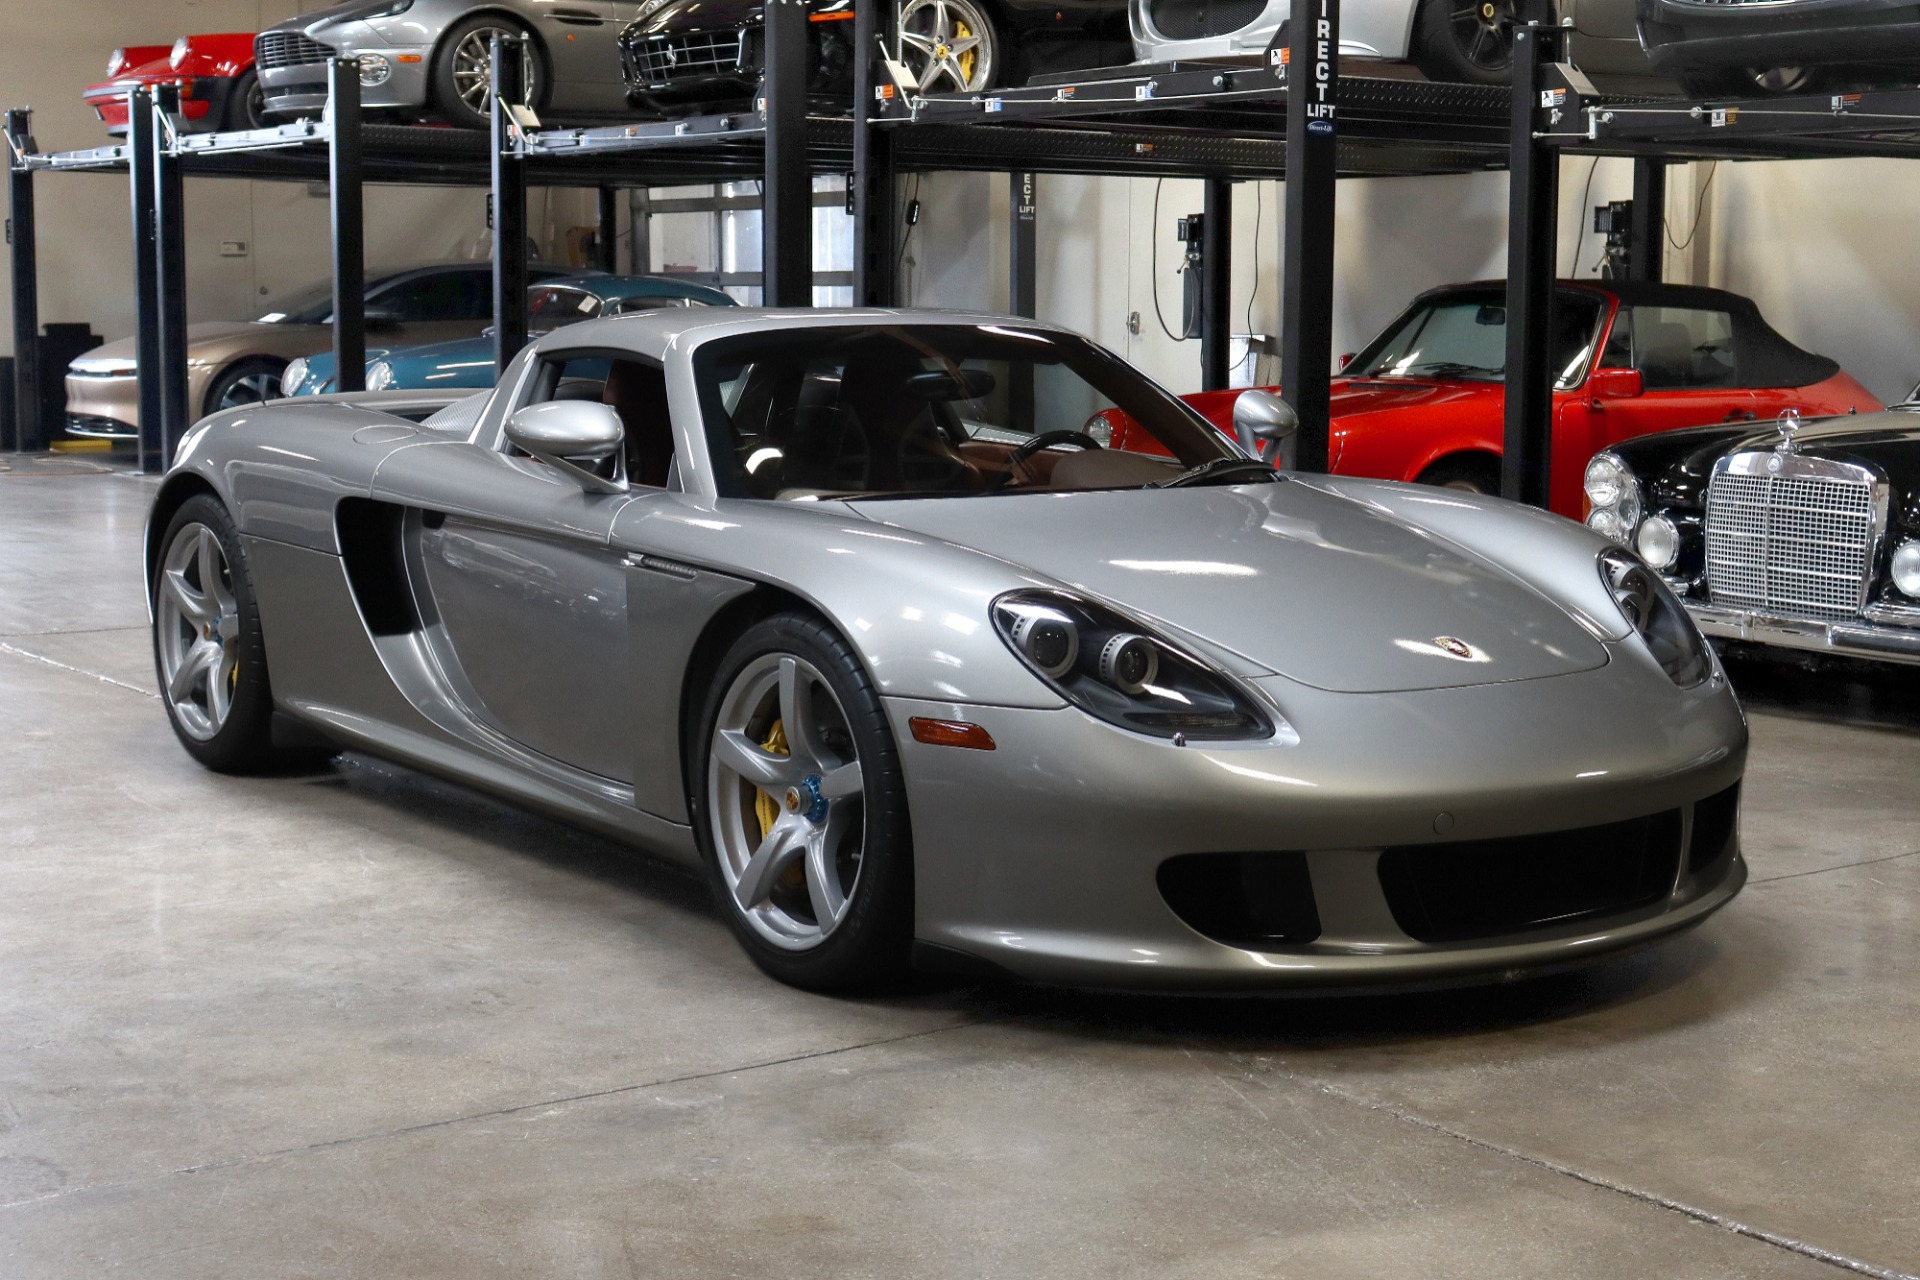 Used 2005 Porsche Carrera GT for sale Sold at San Francisco Sports Cars in San Carlos CA 94070 1